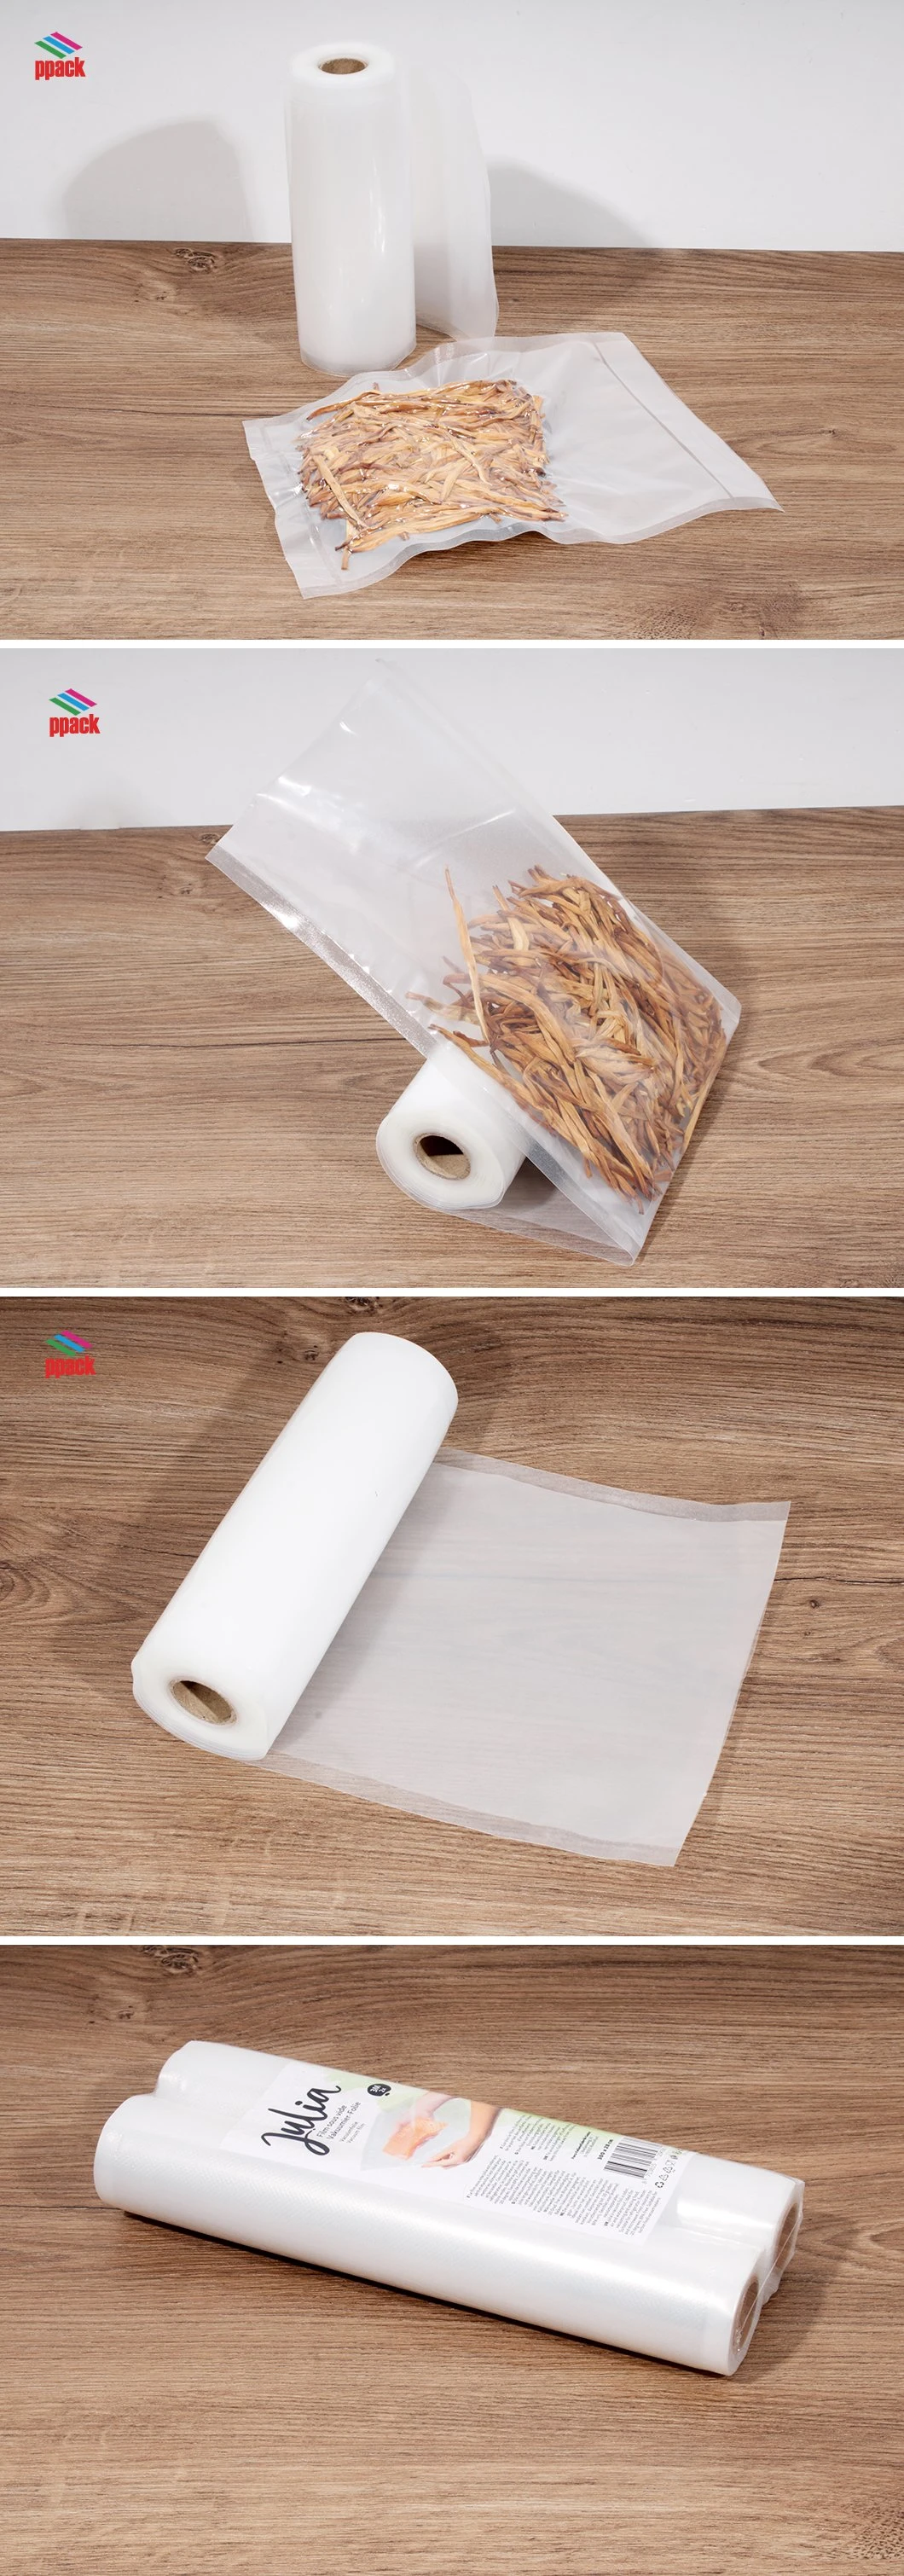 Samples Free! 17 Years Experience Plastic Food Packaging Embossed Vacuum Bag Sealer Roll Made in China Manufacture